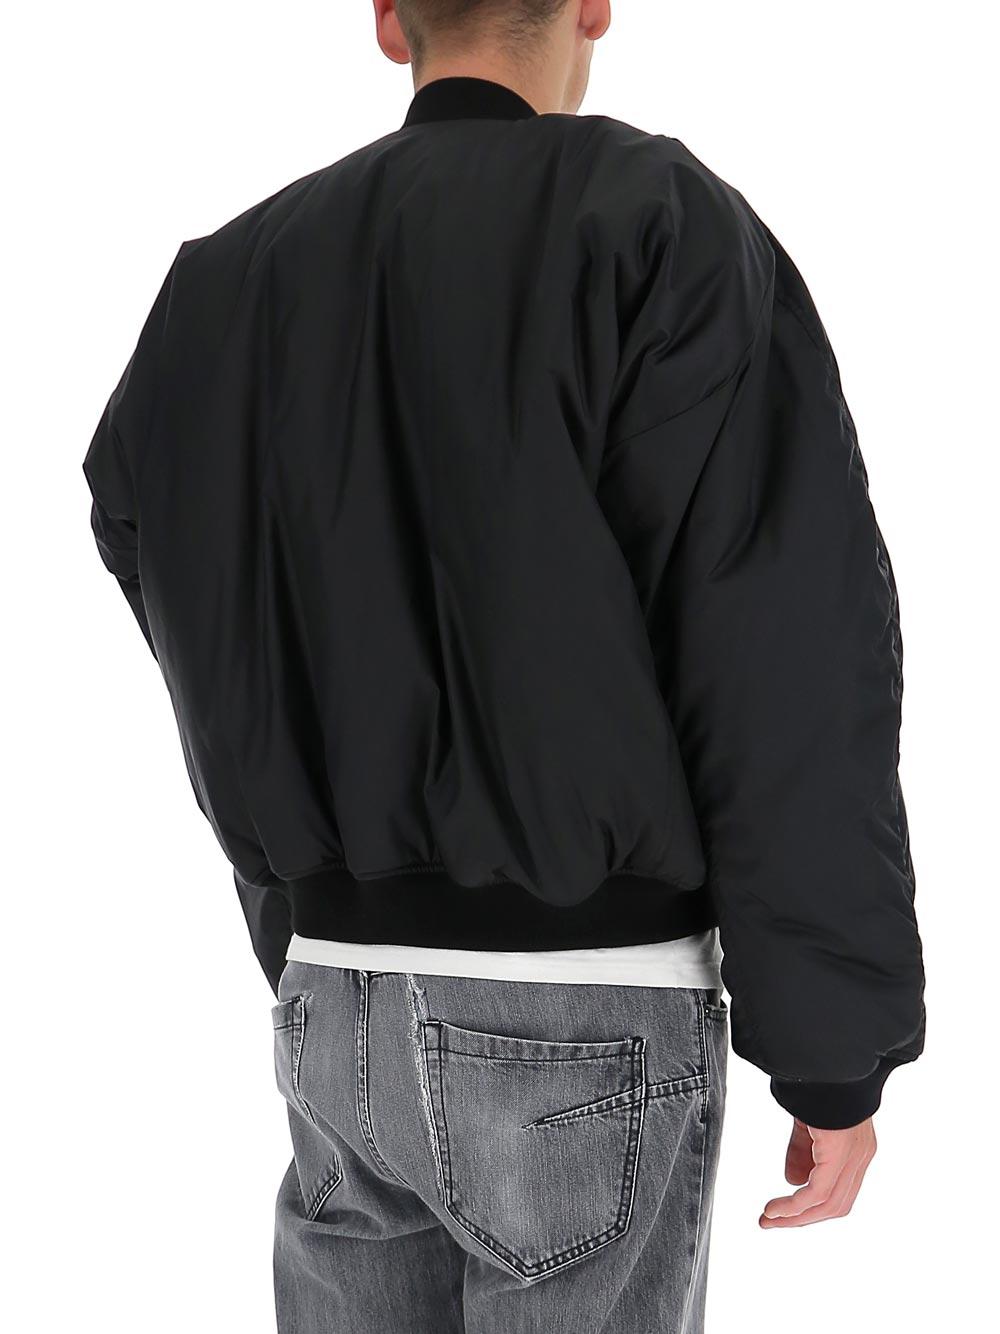 Balenciaga Synthetic Steroid Bomber Jacket in Black for Men - Lyst